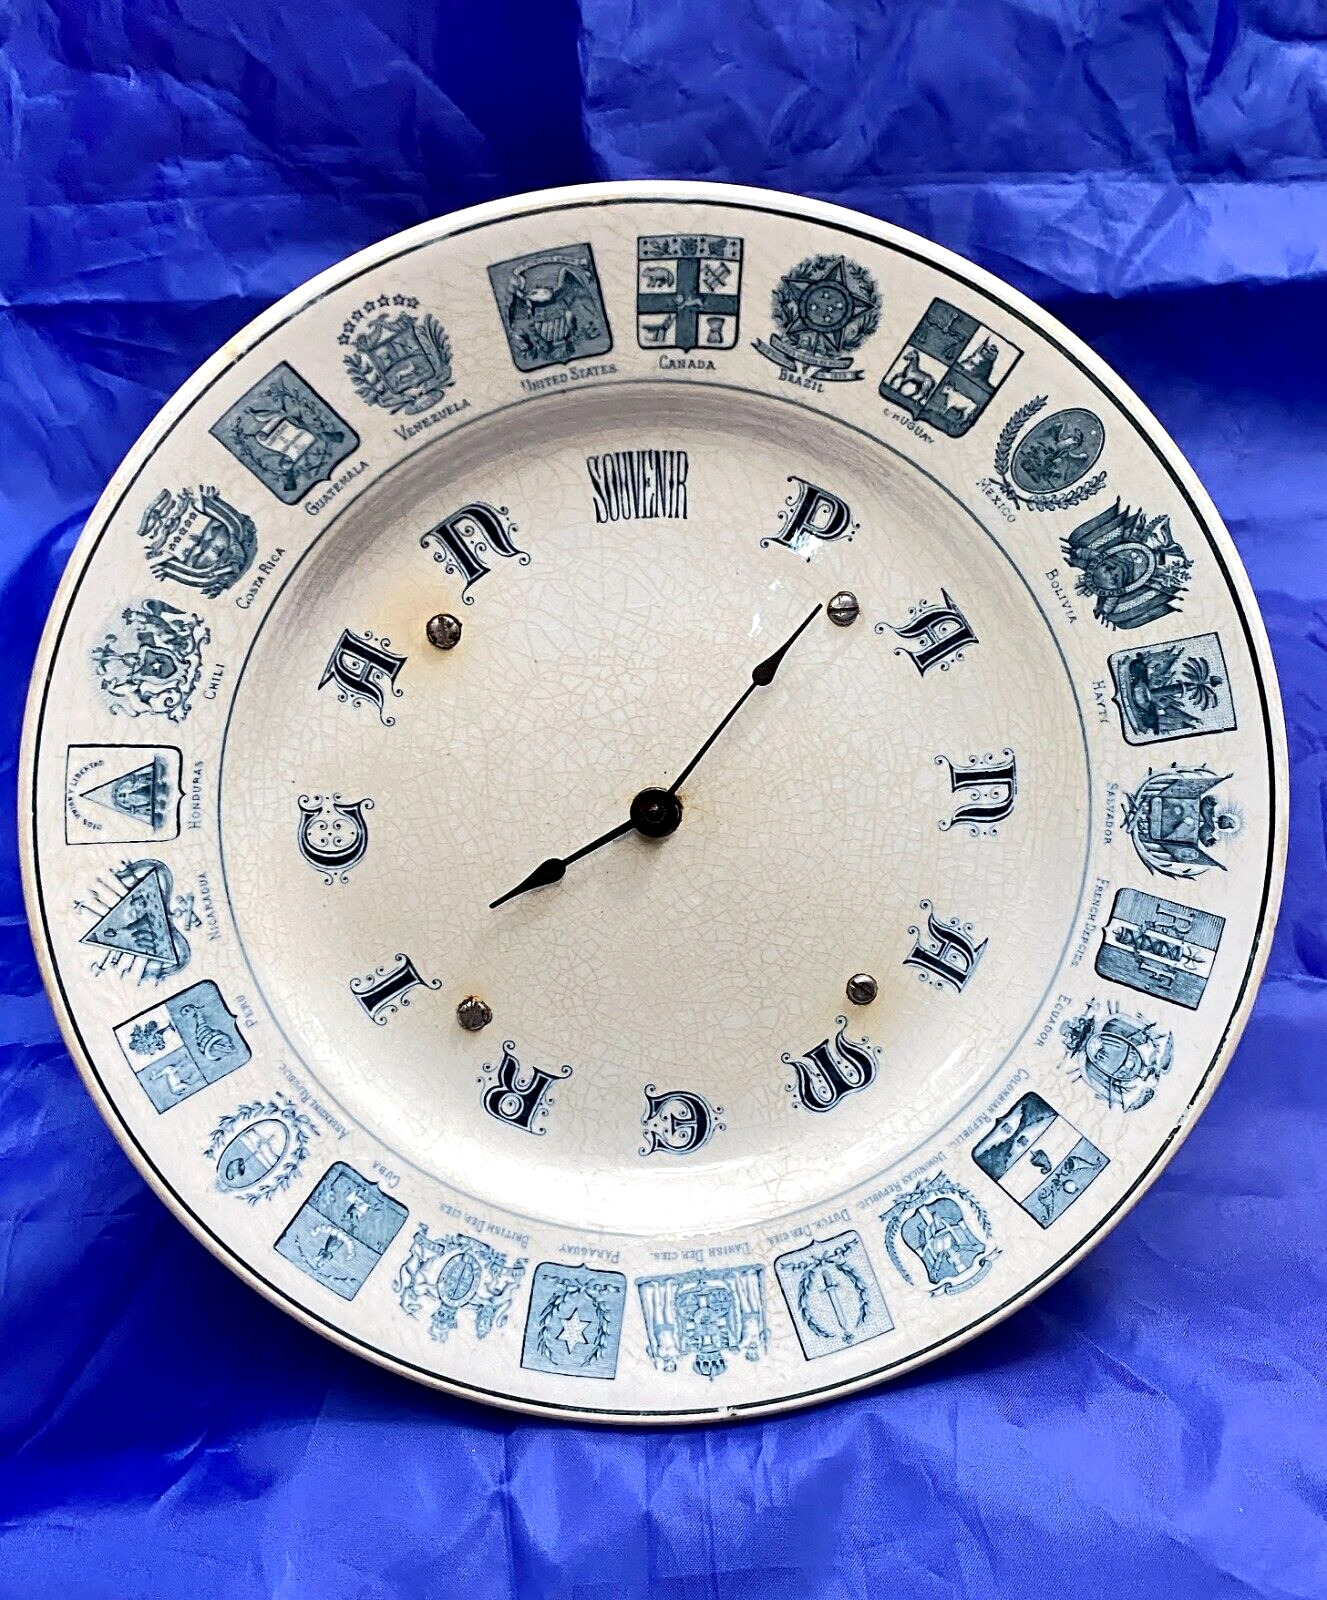 Super Rare 1901 Pan American Exposition Porcelain Plate Clock by C.F. Chouffet